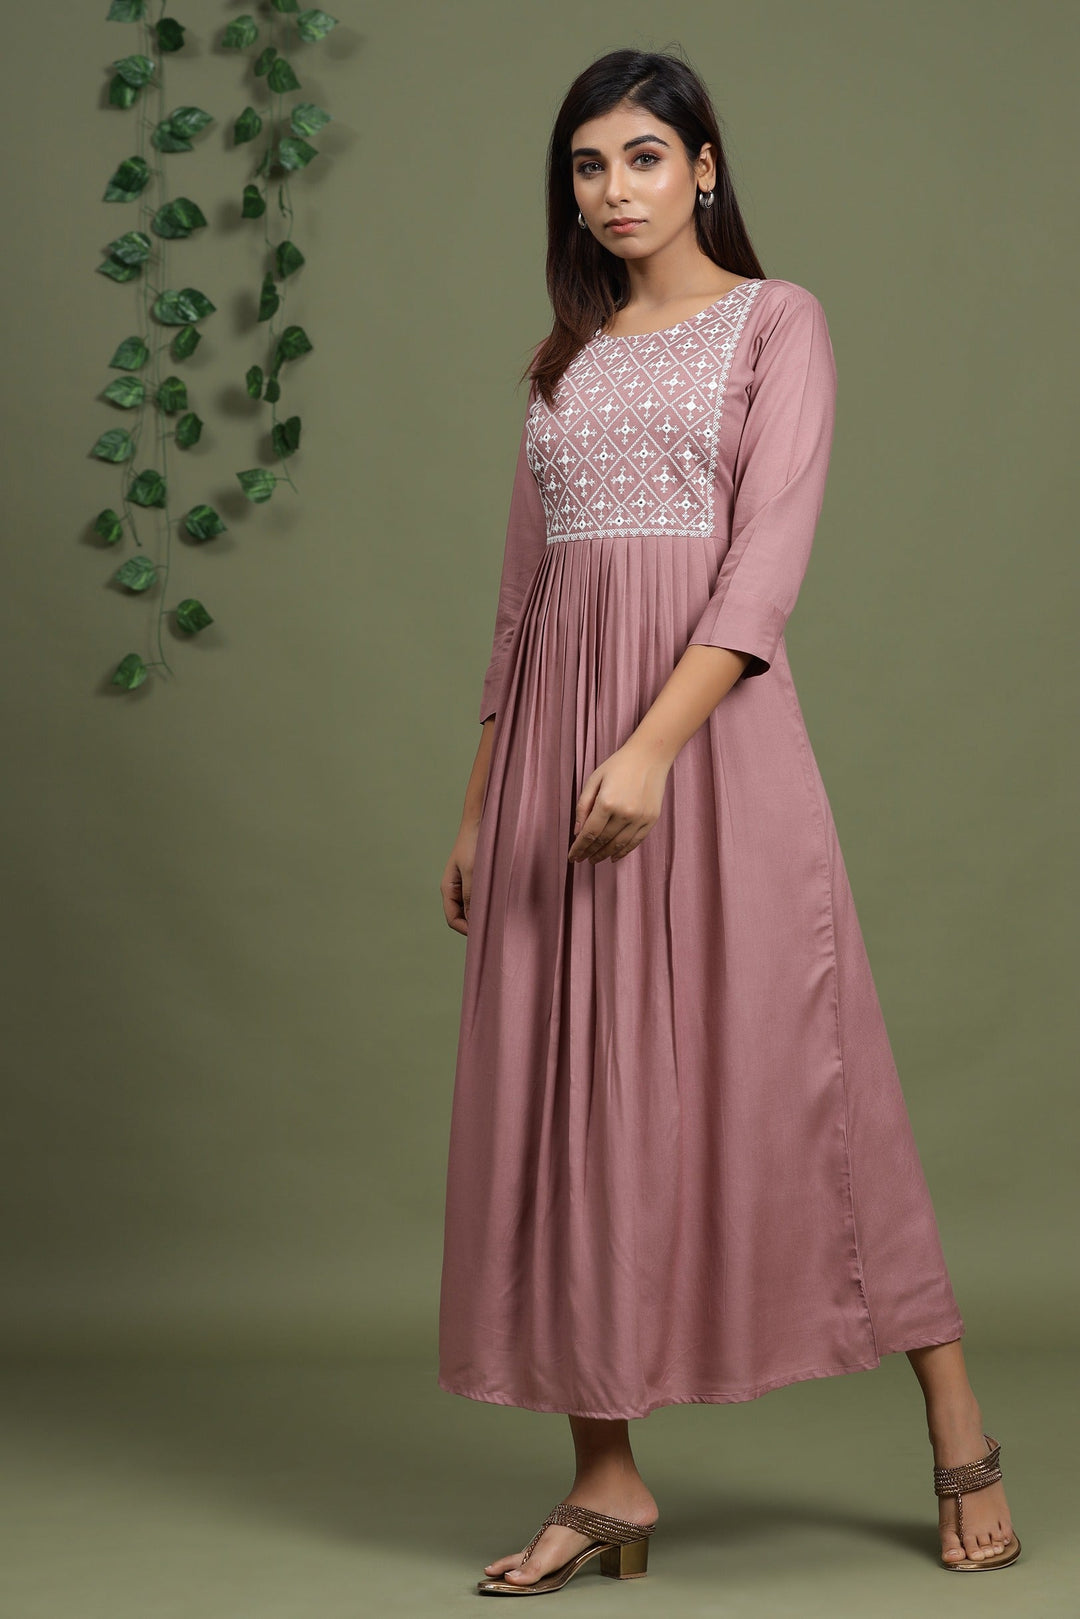 Purple Solid Embroidered Dress-Yufta Store-2901DRSPRS